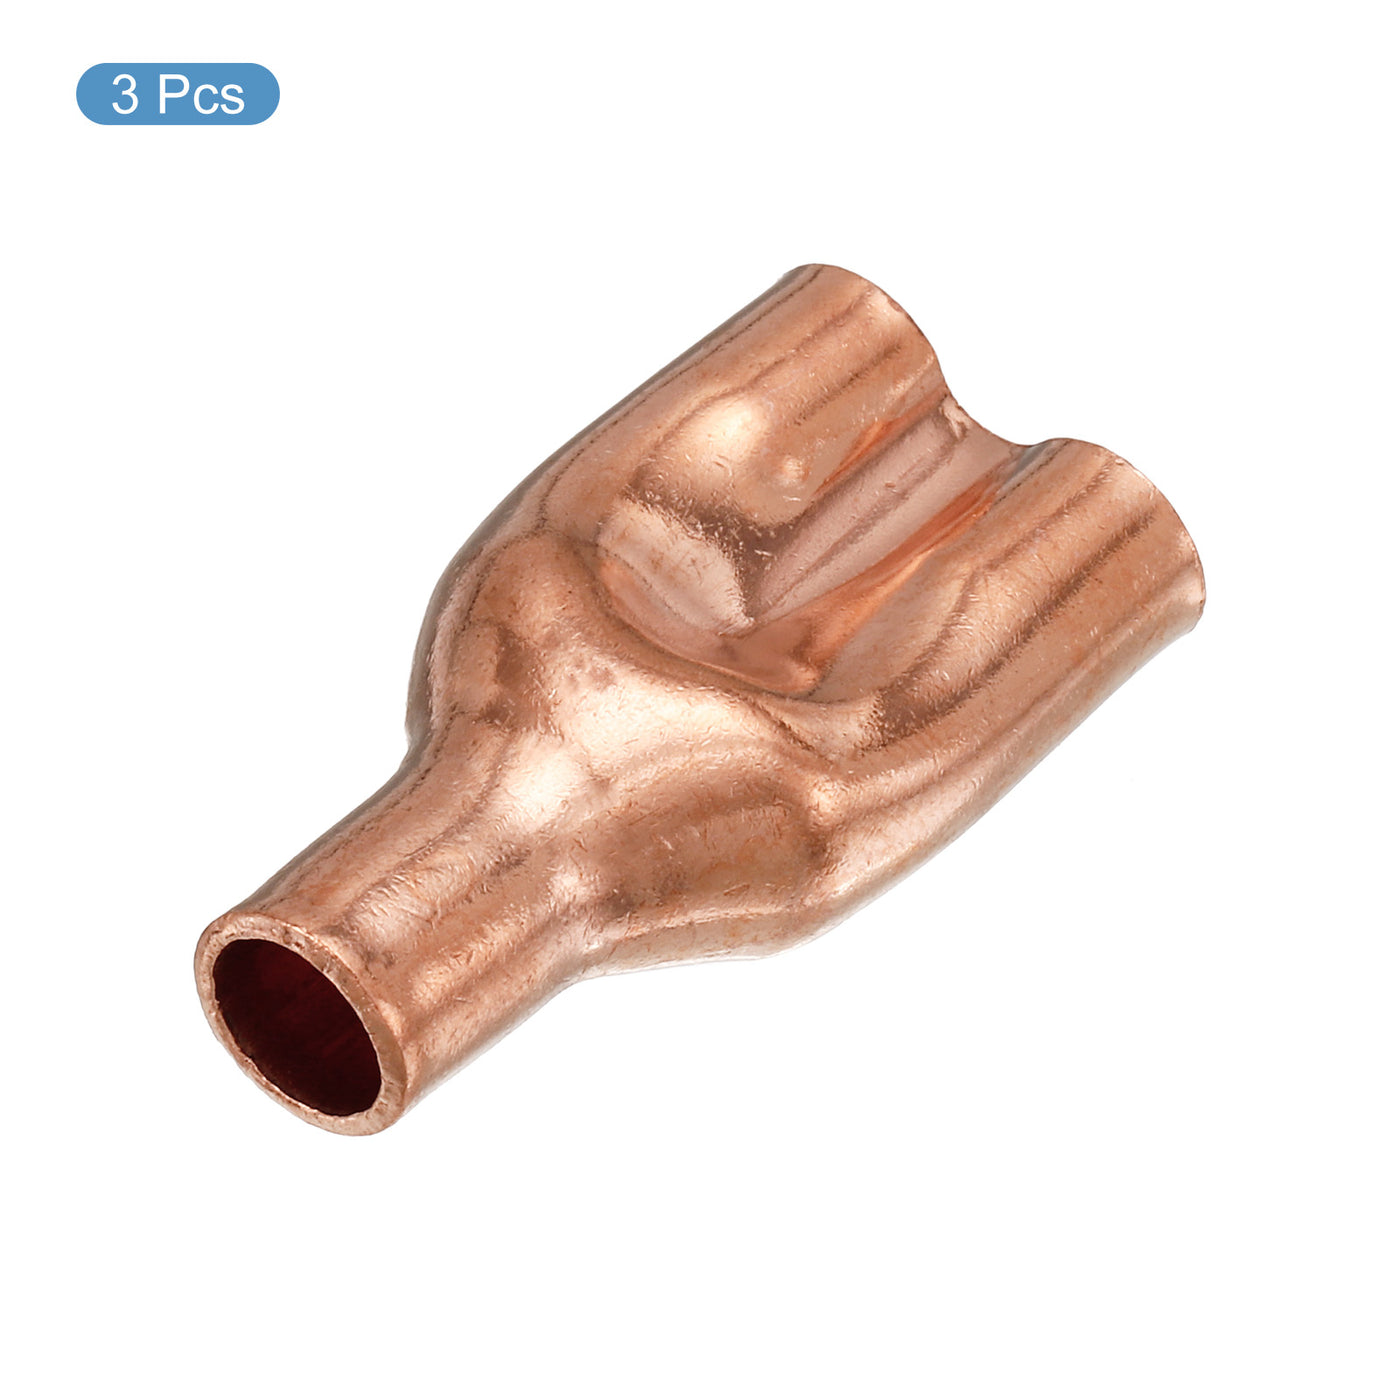 Harfington Tee Y Type Copper Fitting Welding Joint Split Union Intersection 6.35mm or 1/4 Inch ID for HVAC, Air Conditioning Refrigeration System, Pack of 3